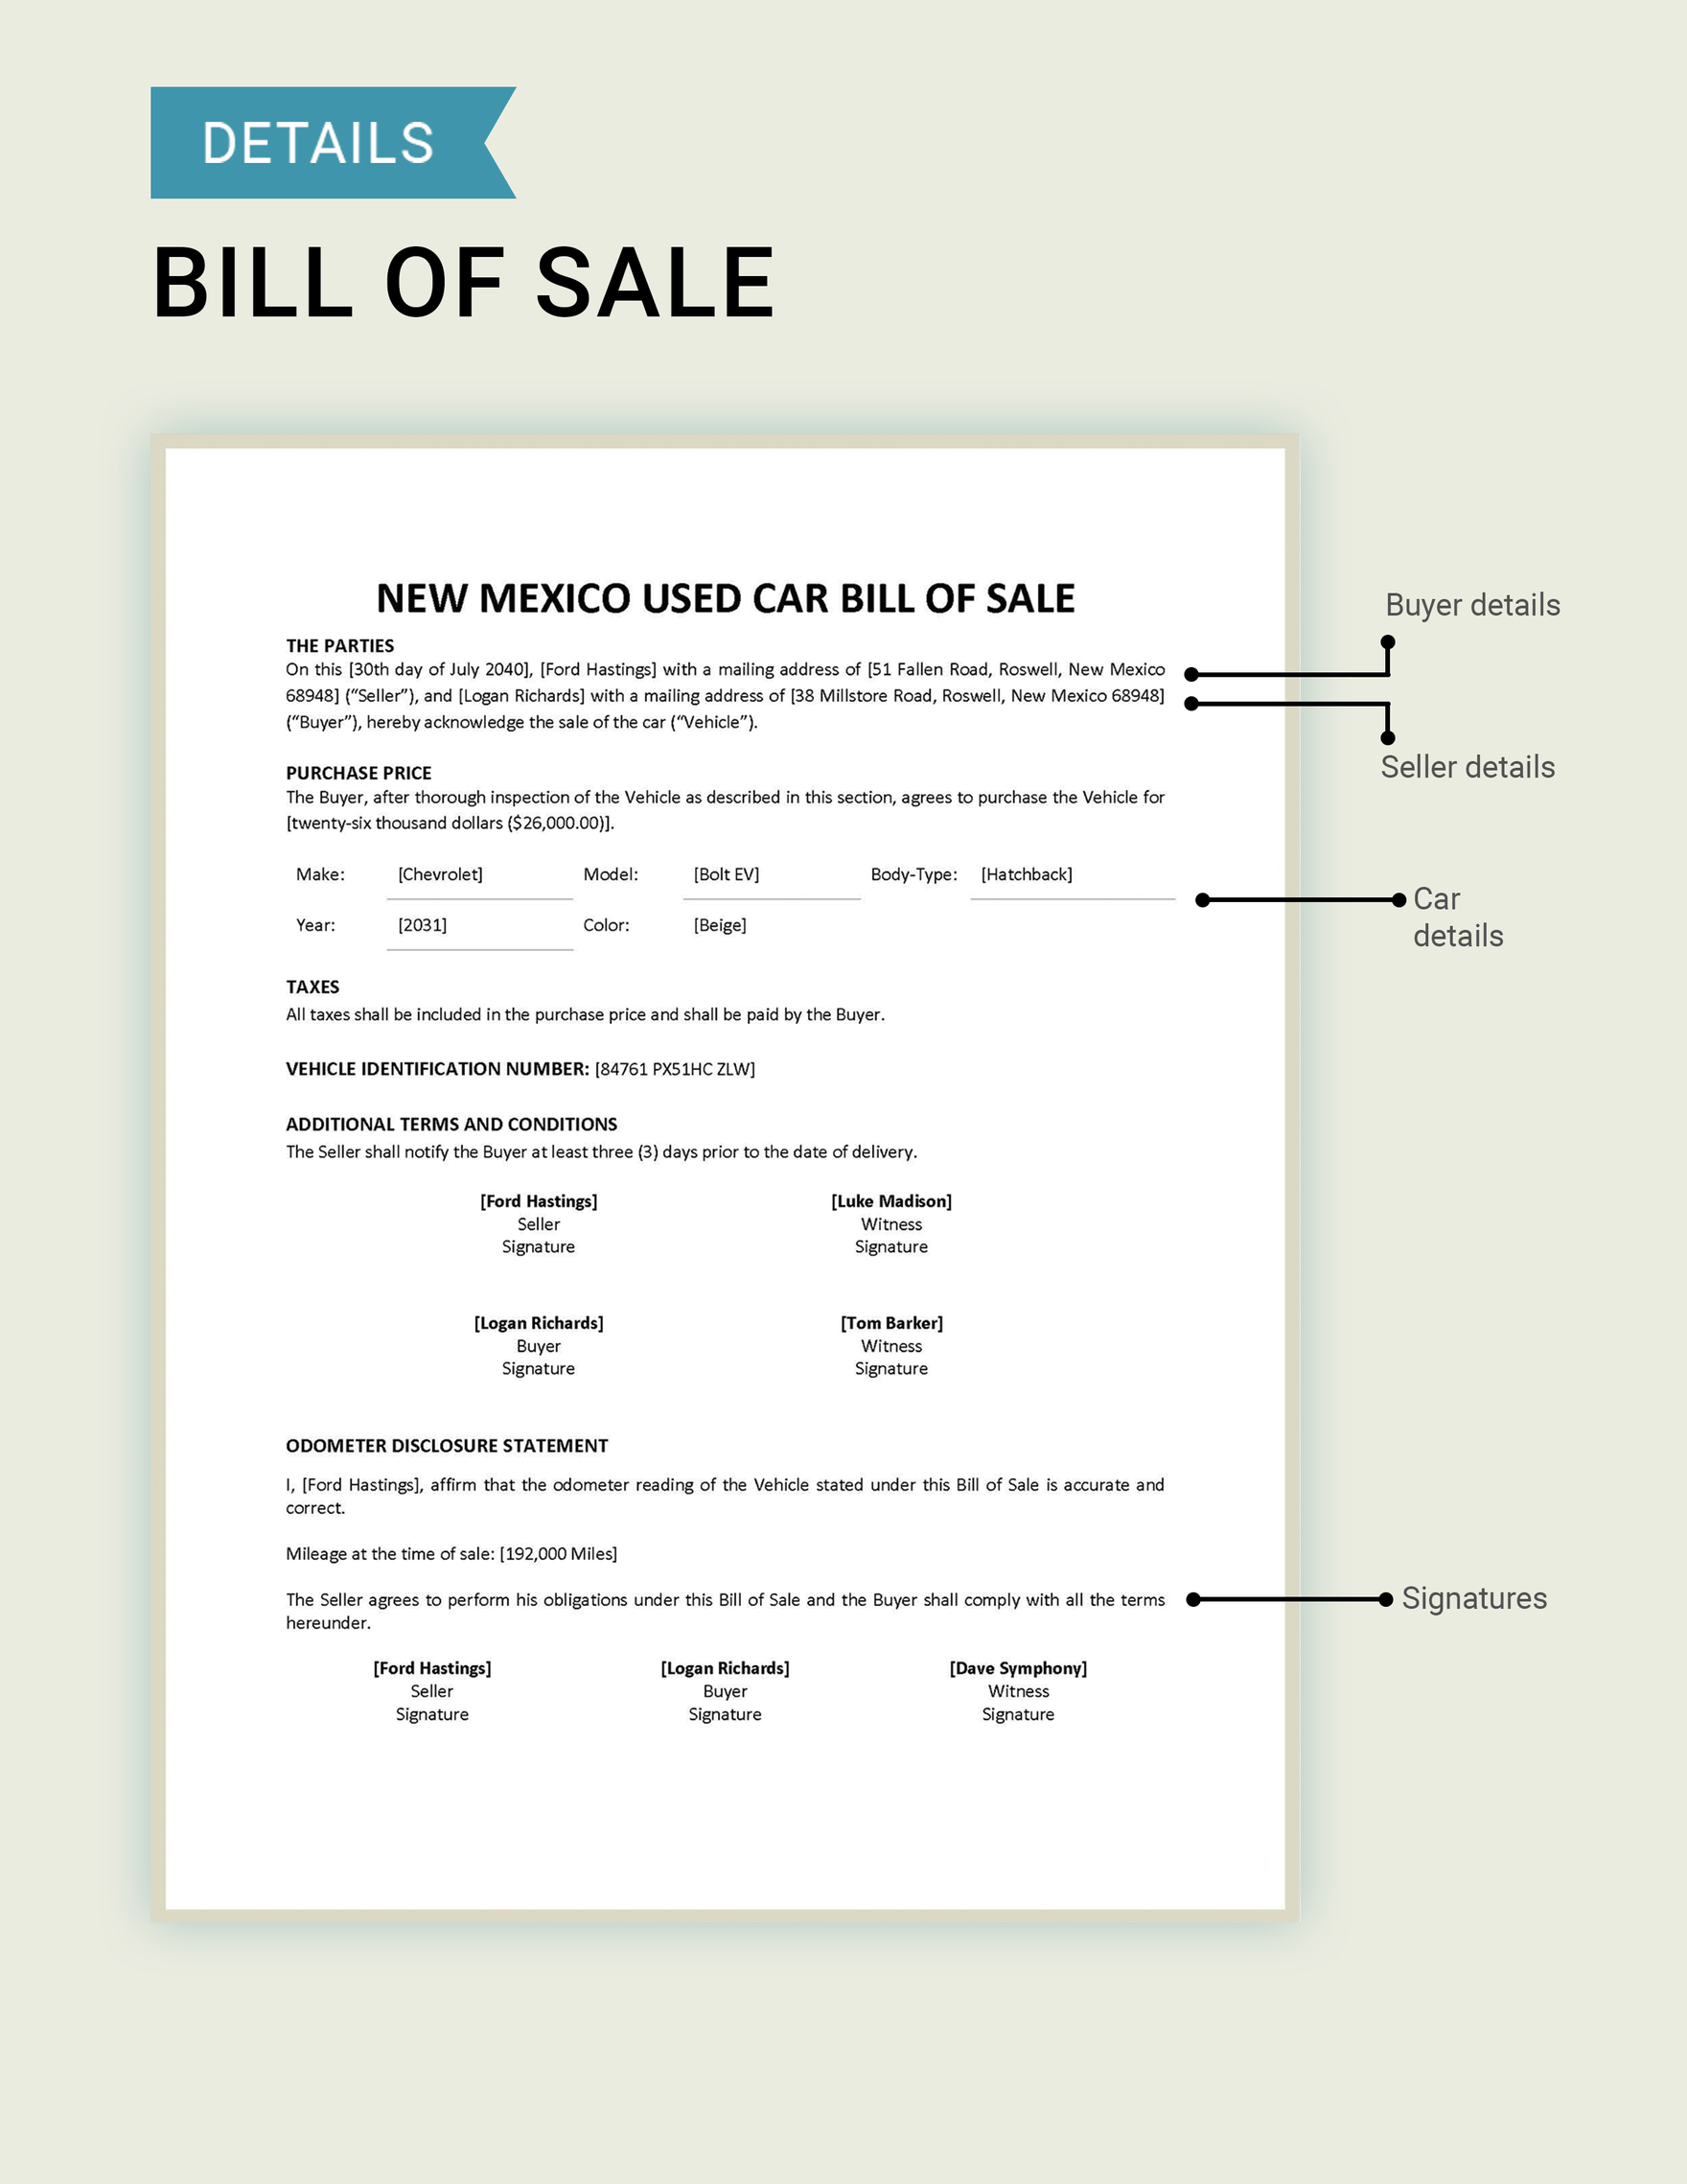 New Mexico Used Car Bill of Sale Template